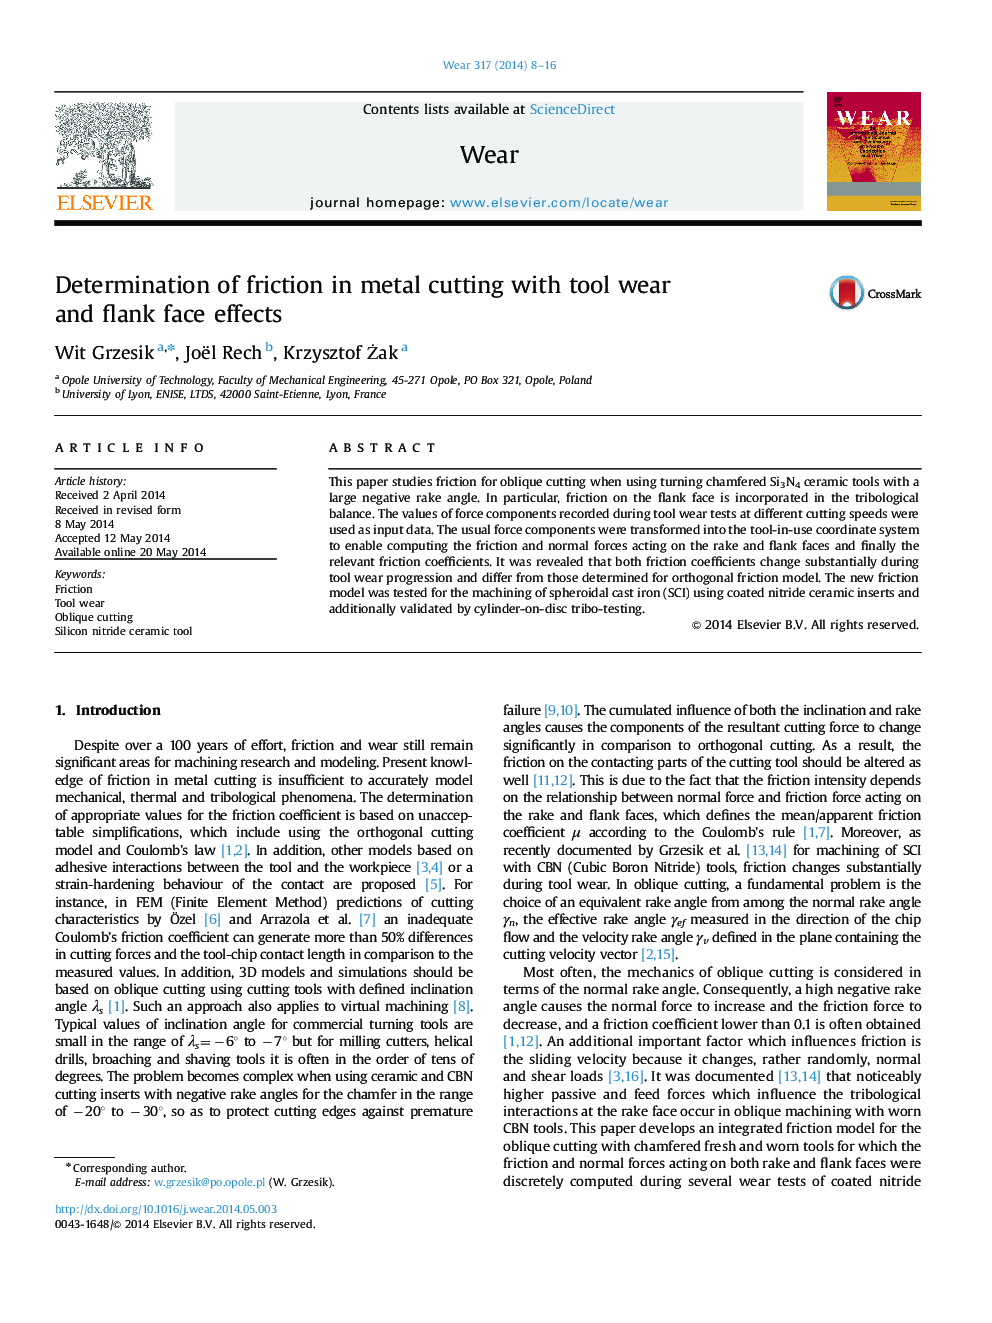 Determination of friction in metal cutting with tool wear and flank face effects